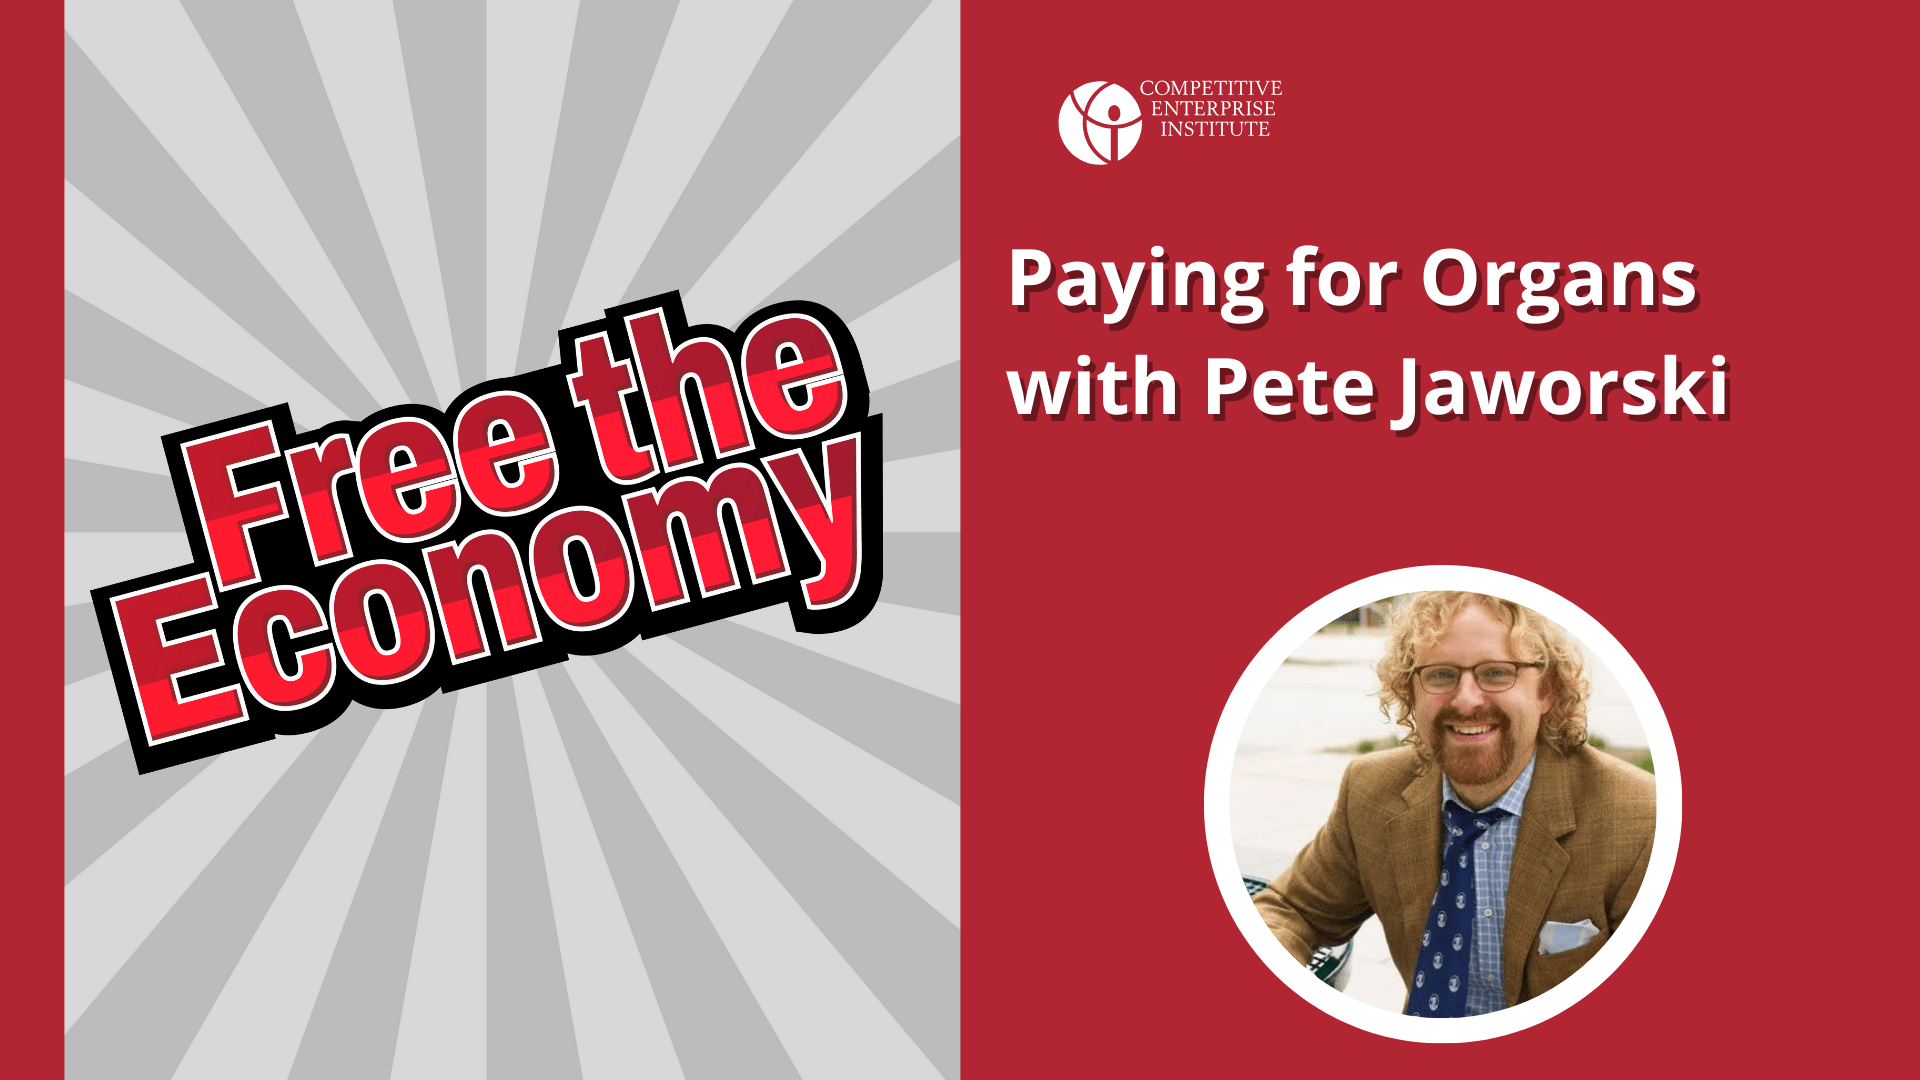 Paying for Organs with Pete Jaworski